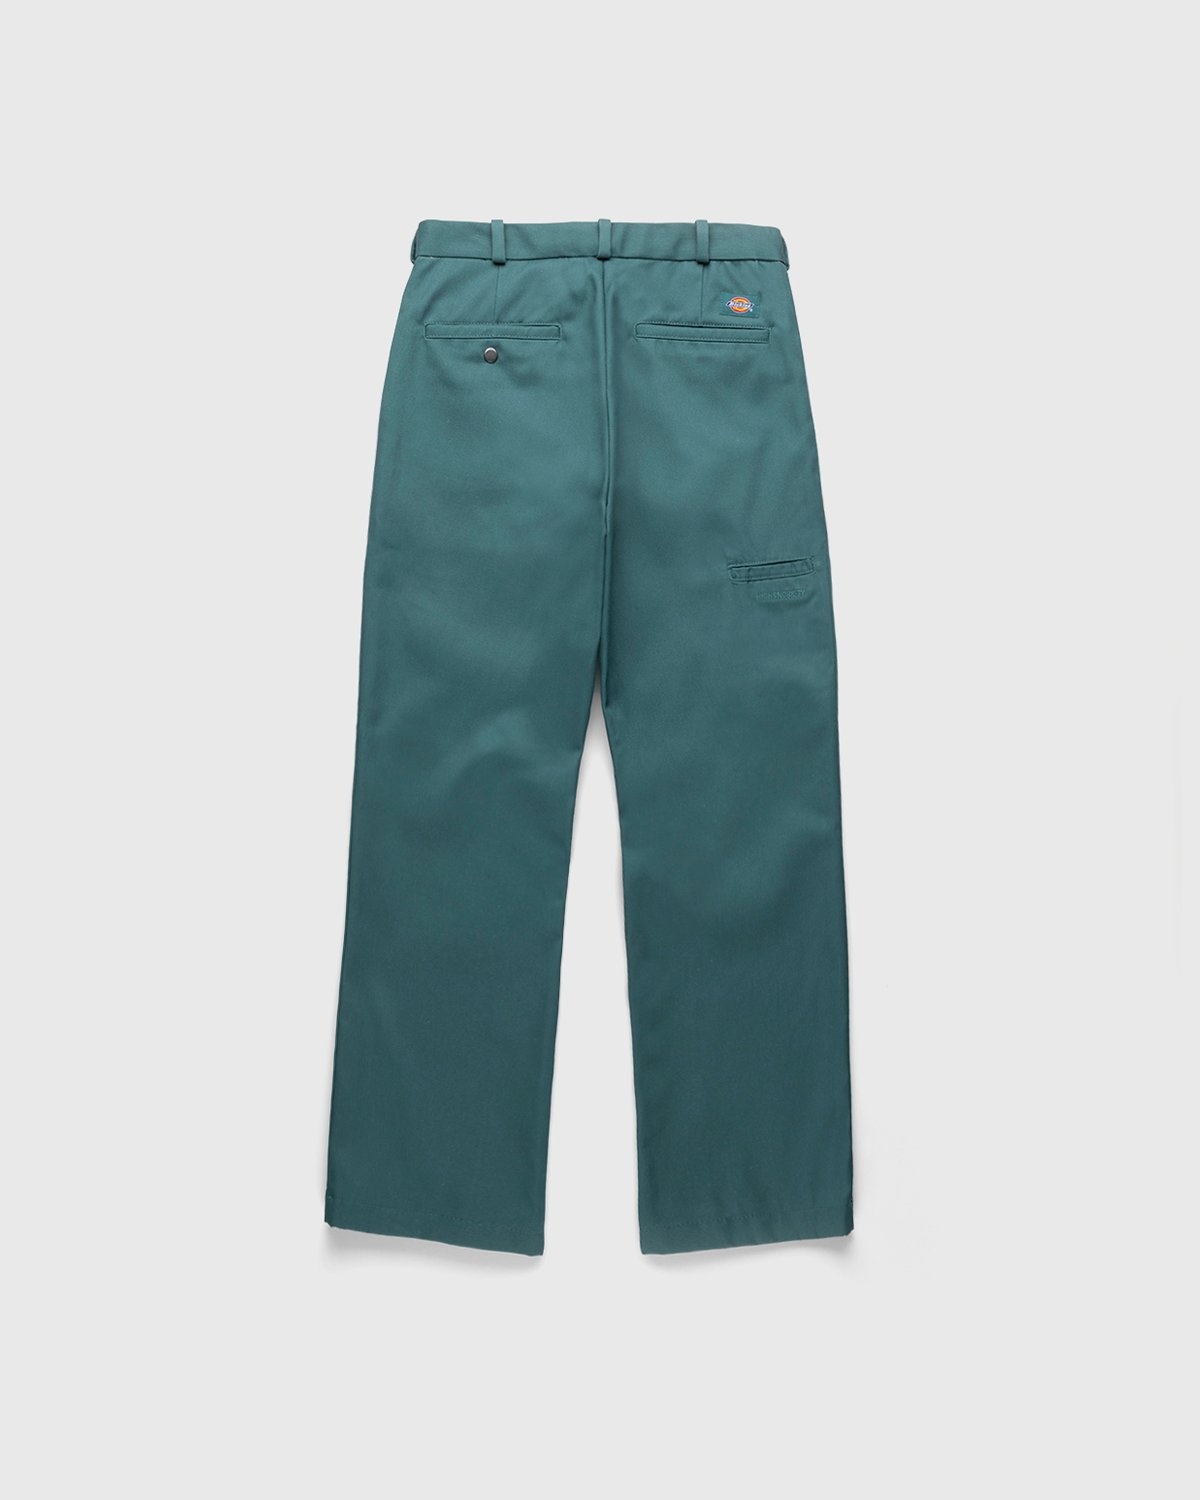 Highsnobiety x Dickies – Pleated Work Pants Lincoln Green - Work Pants - Green - Image 2